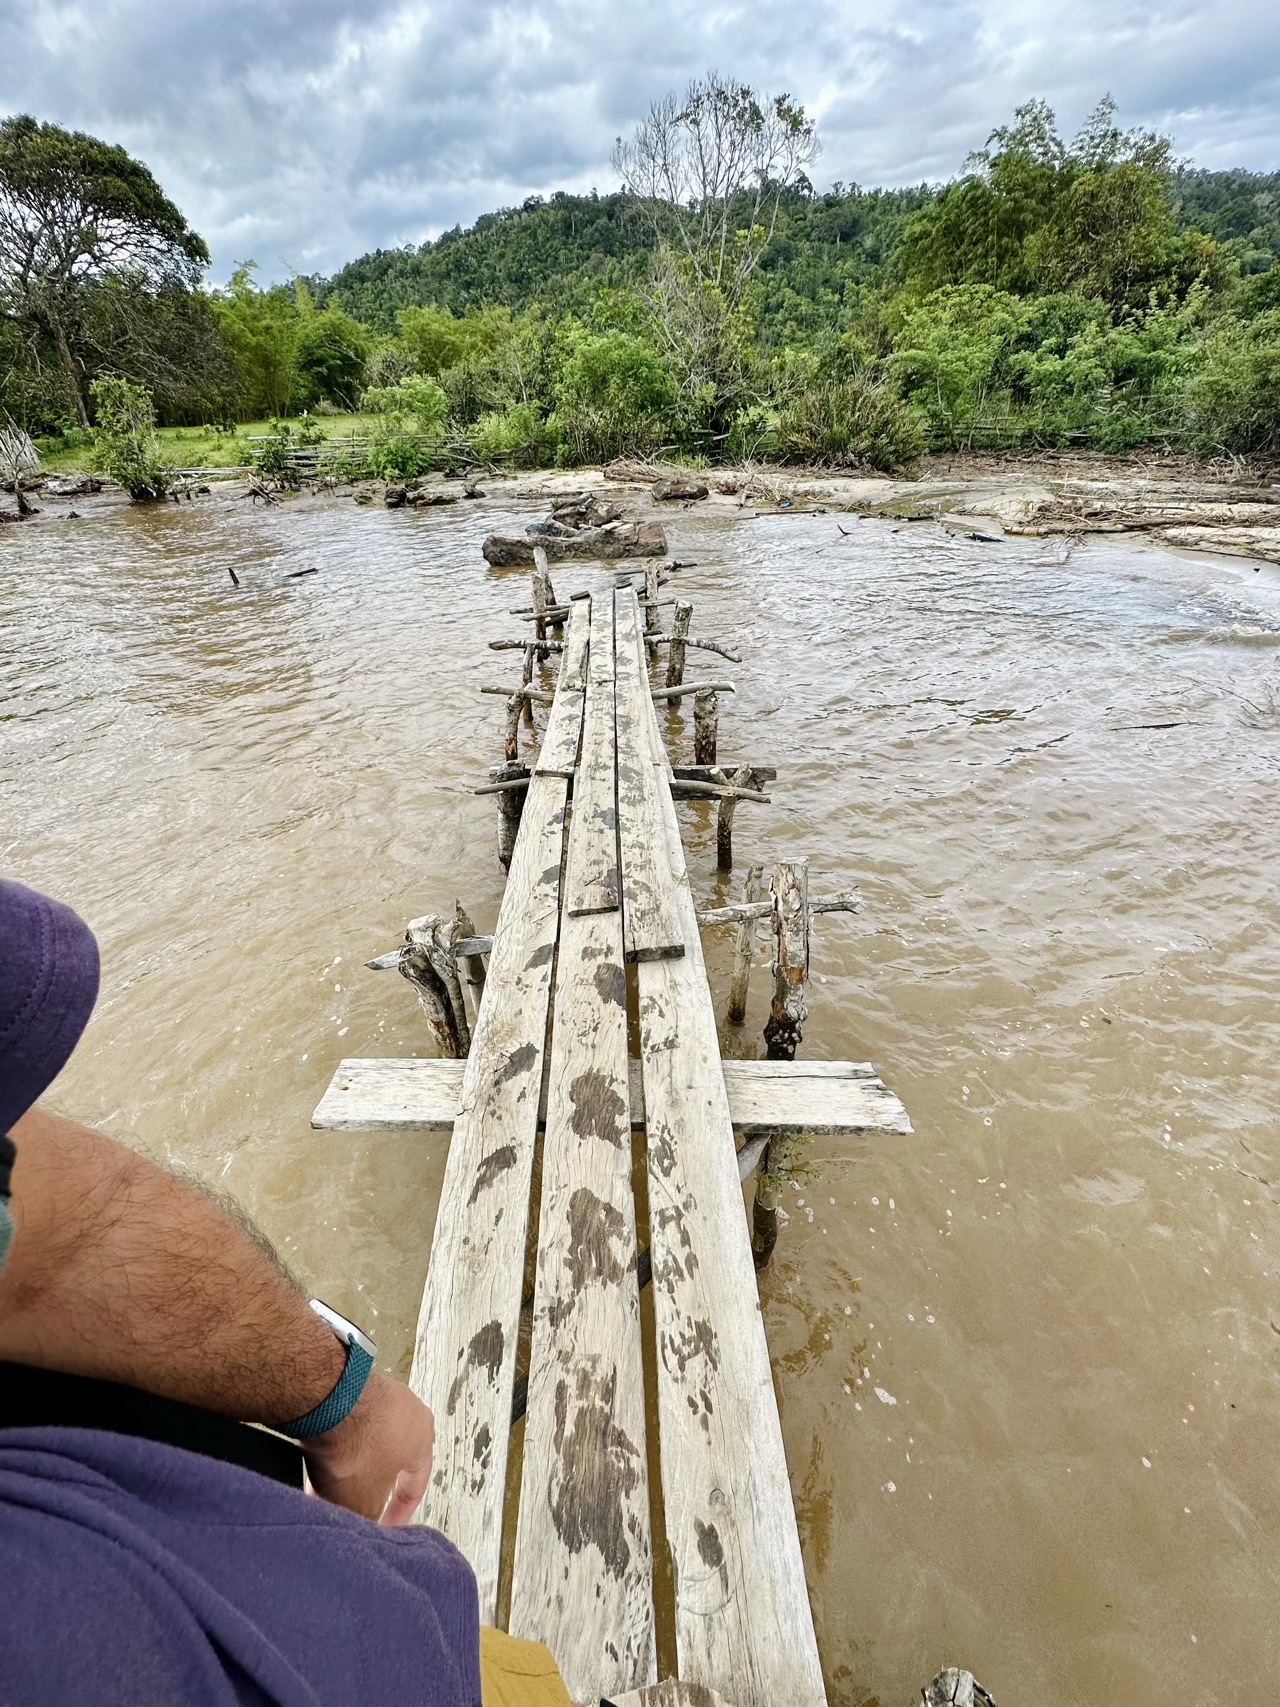 One part of our trek to find the aye-aye, a bridge that had seen better days